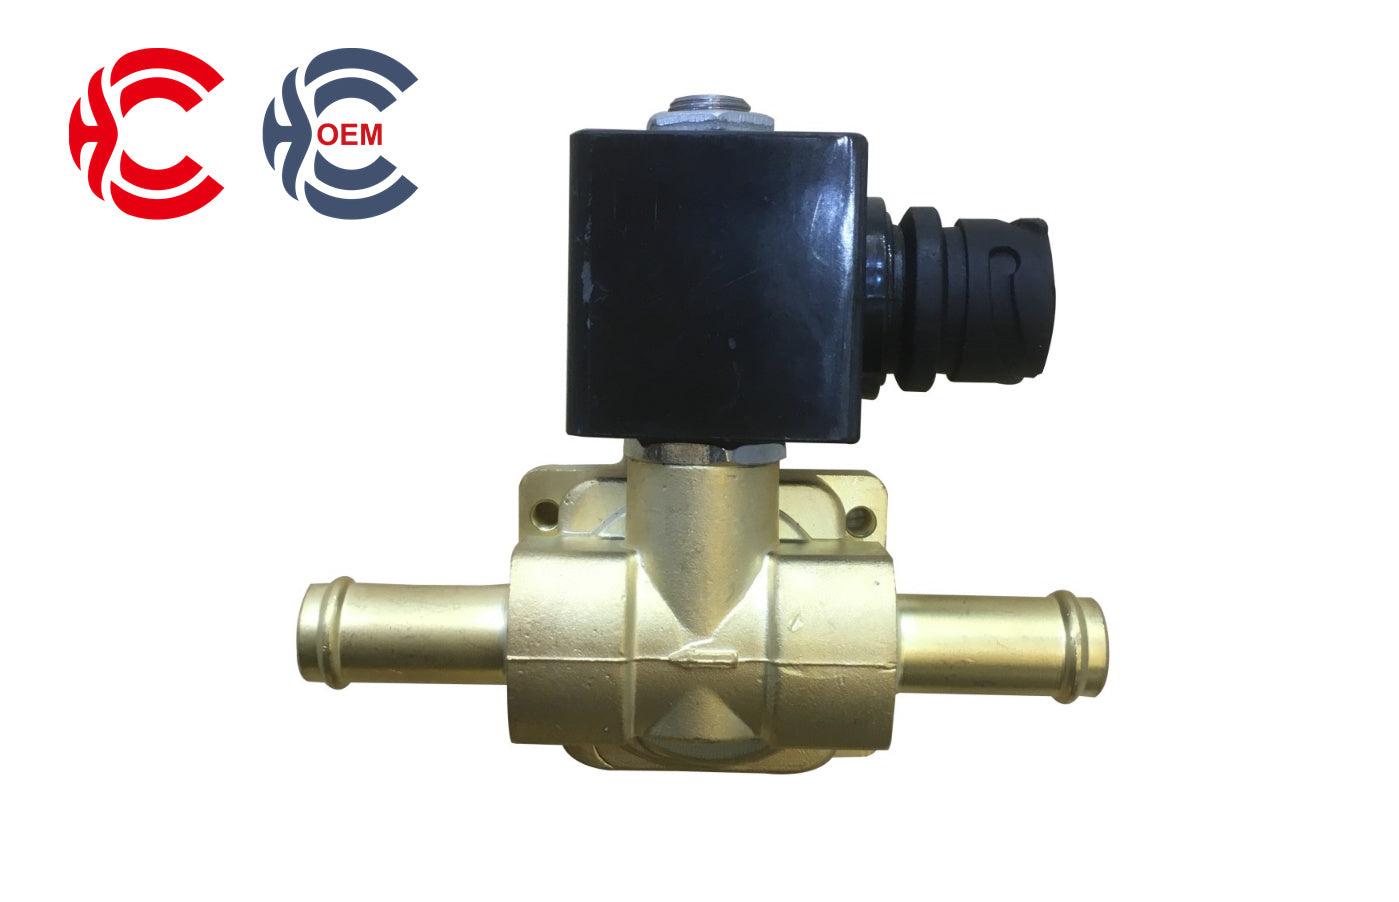 OEM: HUALING B Adblue/Urea Heating Solenoid ValveMaterial: ABS MetalColor: blackOrigin: Made in ChinaWeight: 200gPacking List: 1* Urea Heating Solenoid Valve More ServiceWe can provide OEM Manufacturing serviceWe can Be your one-step solution for Auto PartsWe can provide technical scheme for you Feel Free to Contact Us, We will get back to you as soon as possible.